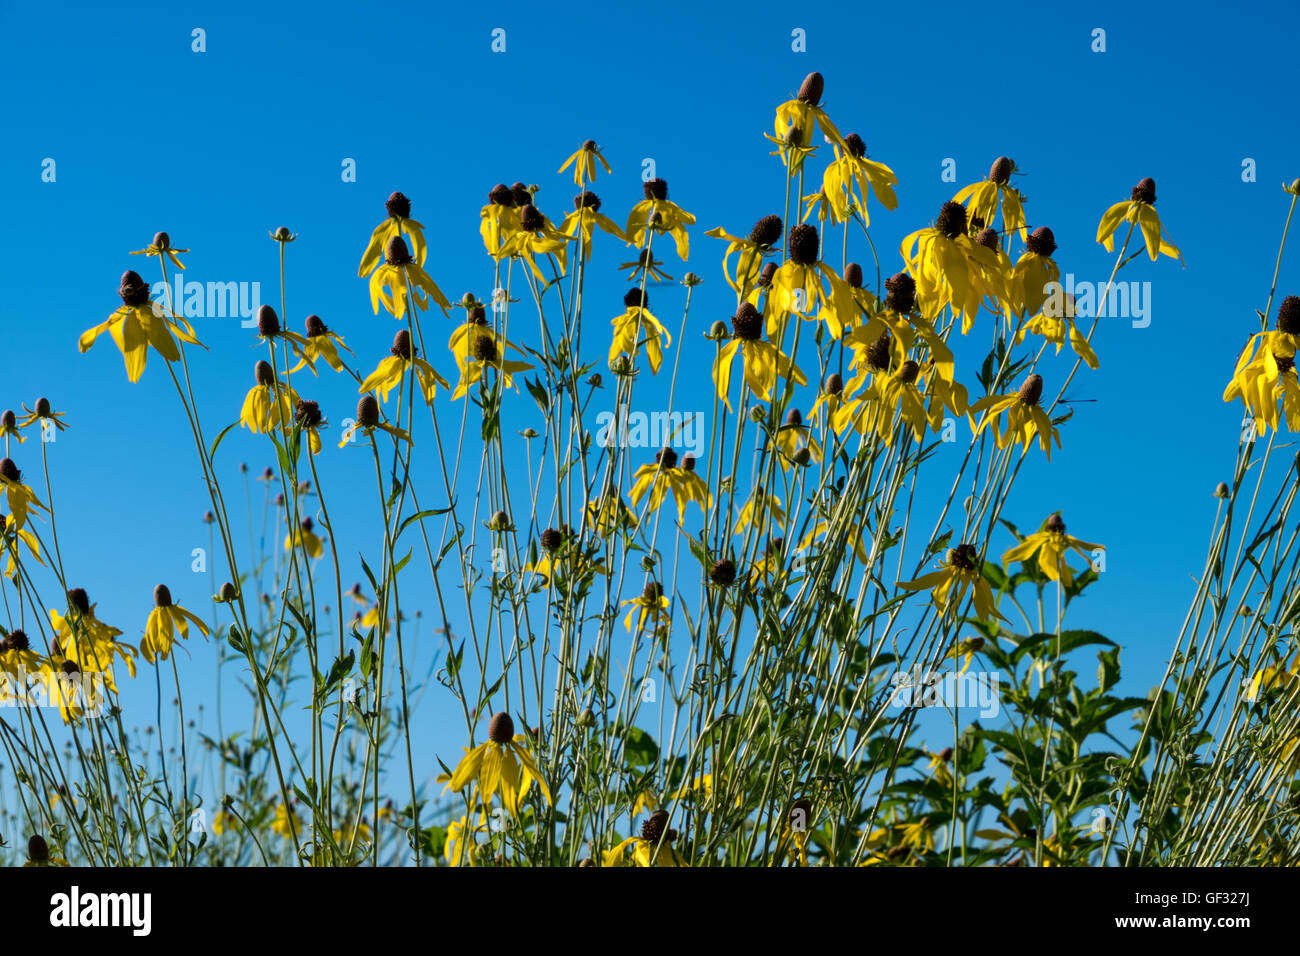 A stand of Gray Headed Coneflowers contrasted against a vivid blue sky in Whitehall, Michigan. Stock Photo